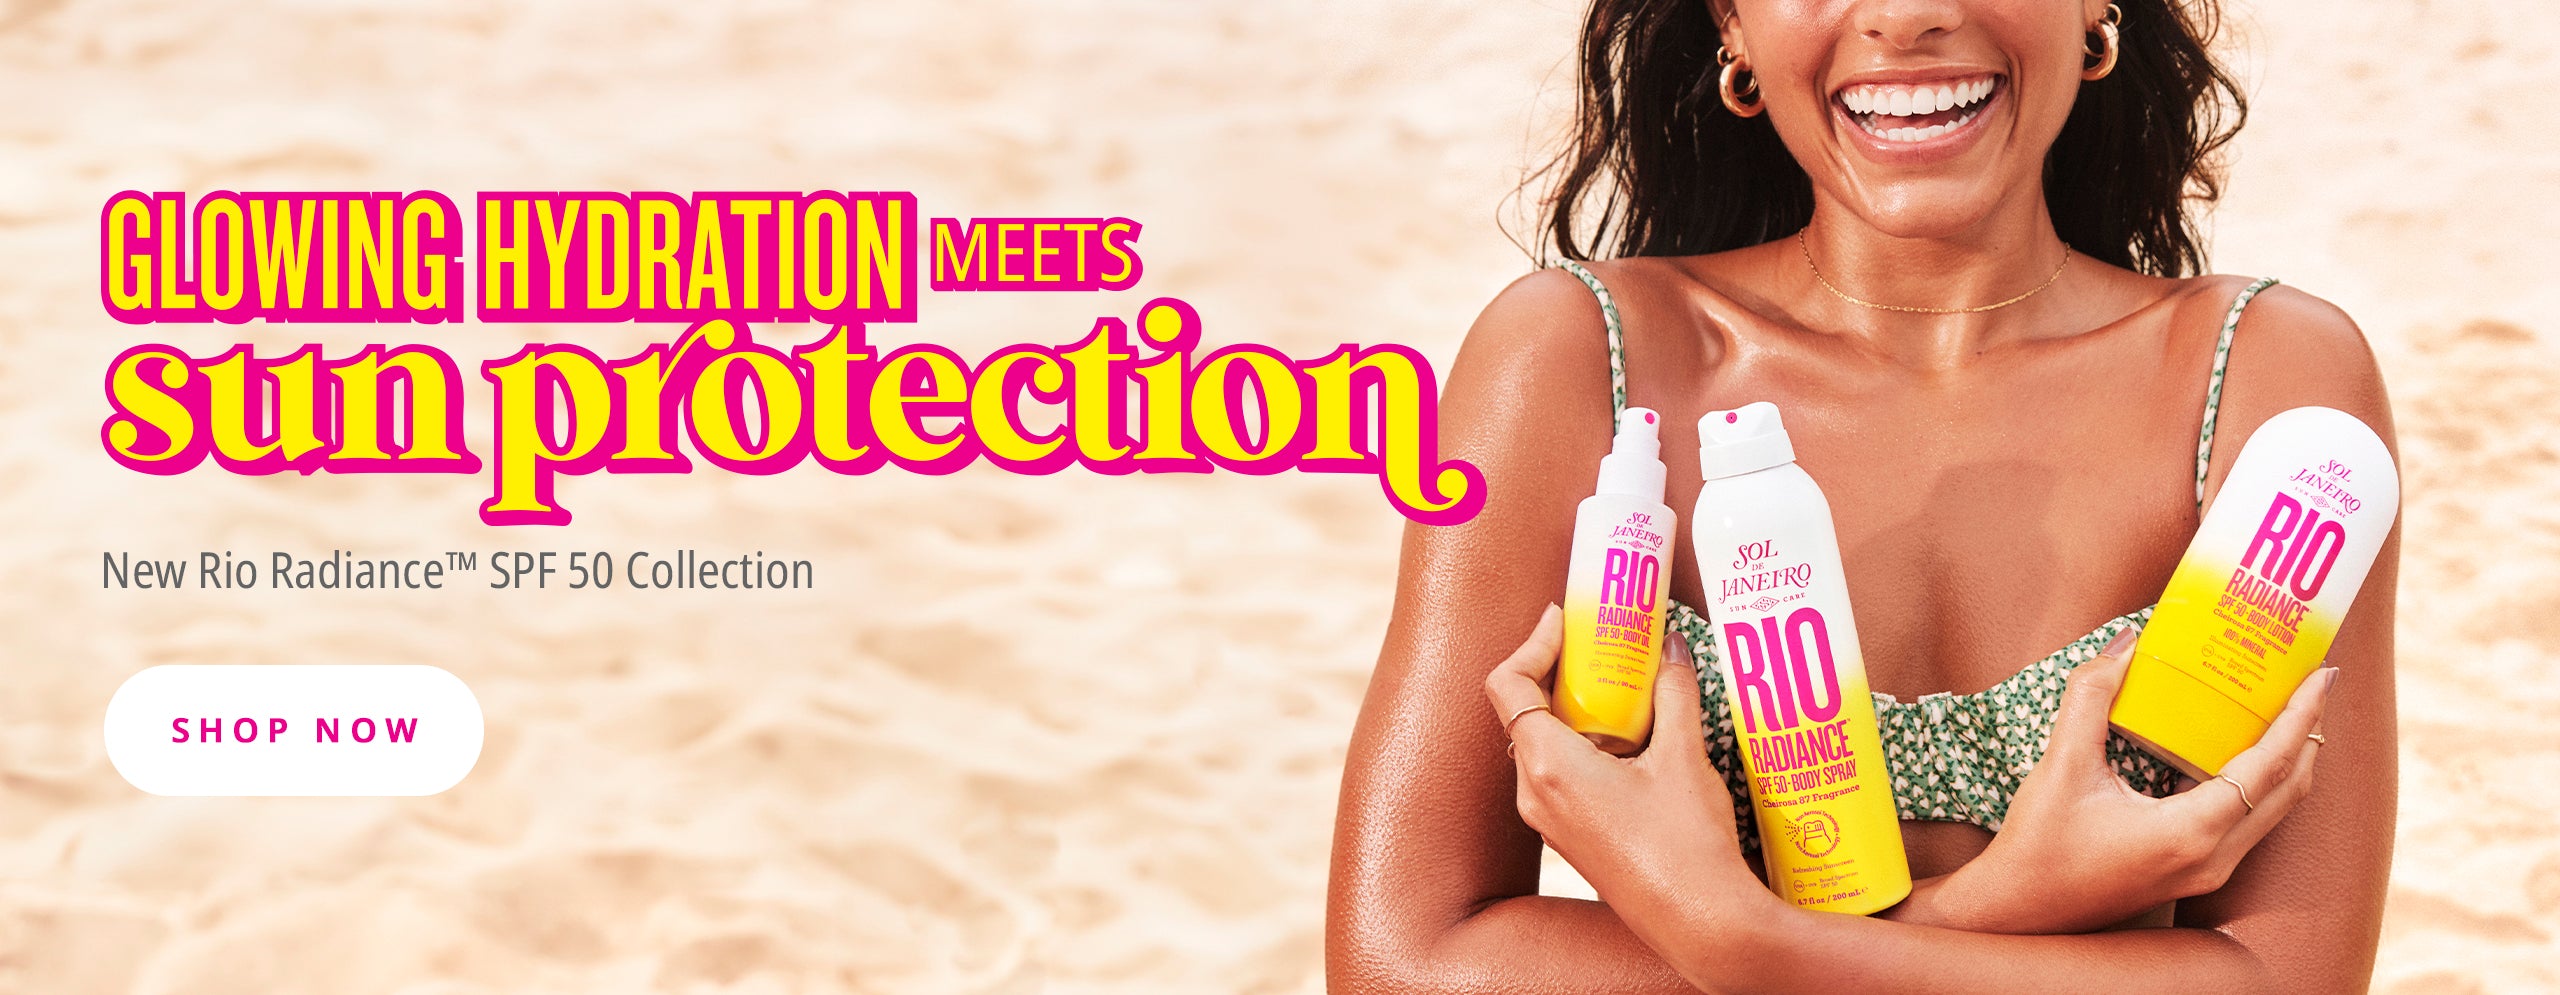 Glowing hydration meets sun protection - New Rio Radiance SPF collection